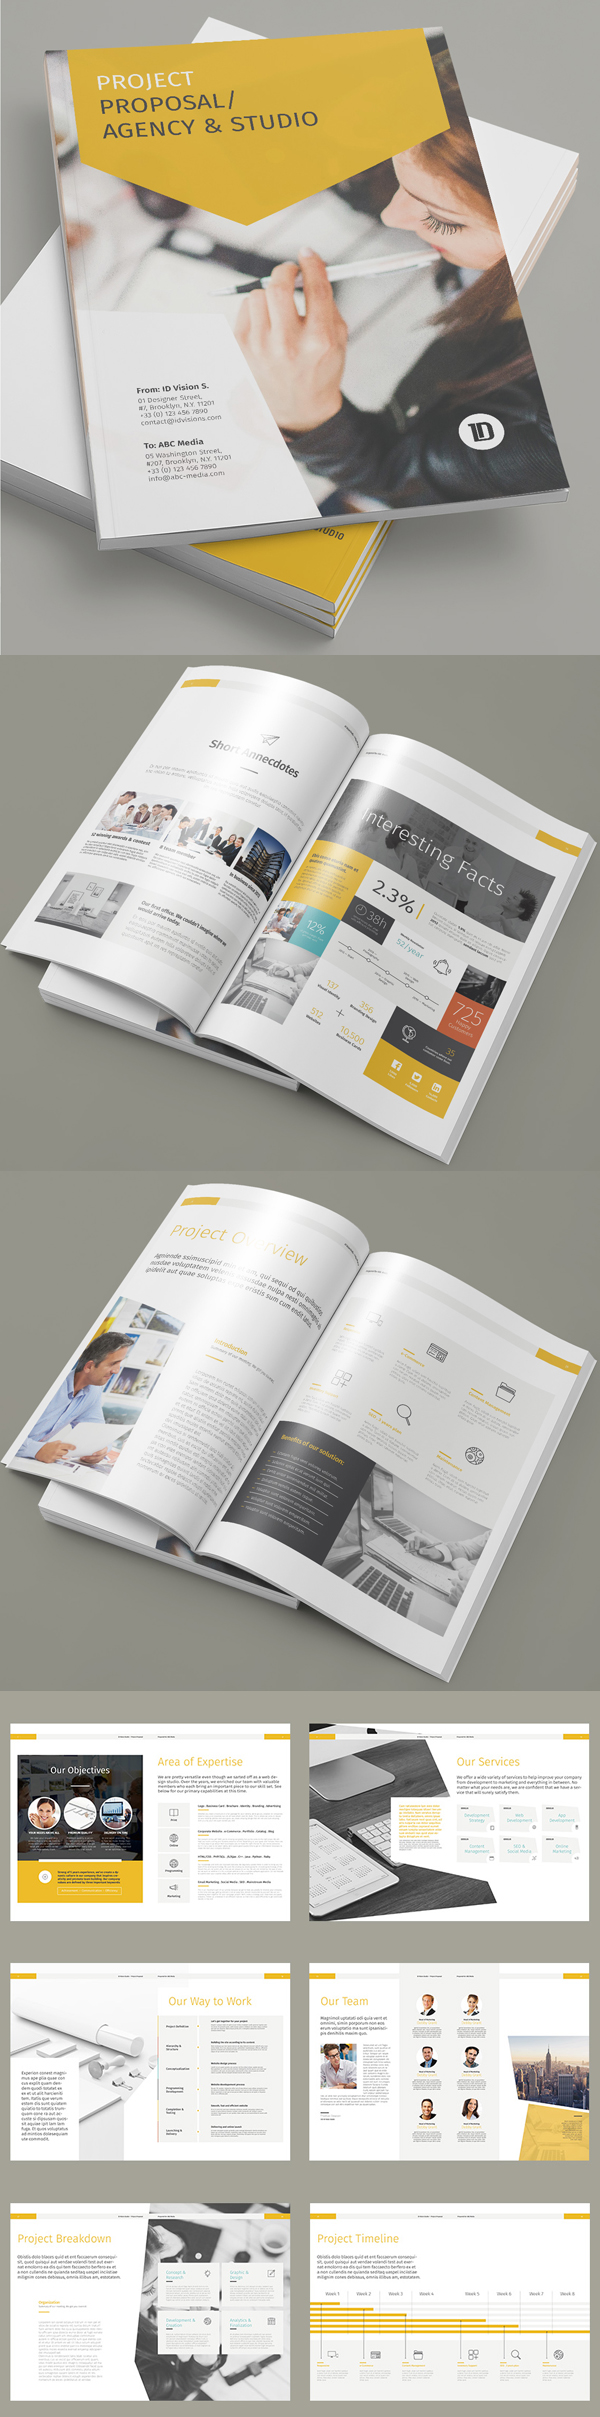 Project Proposal Brochure Template